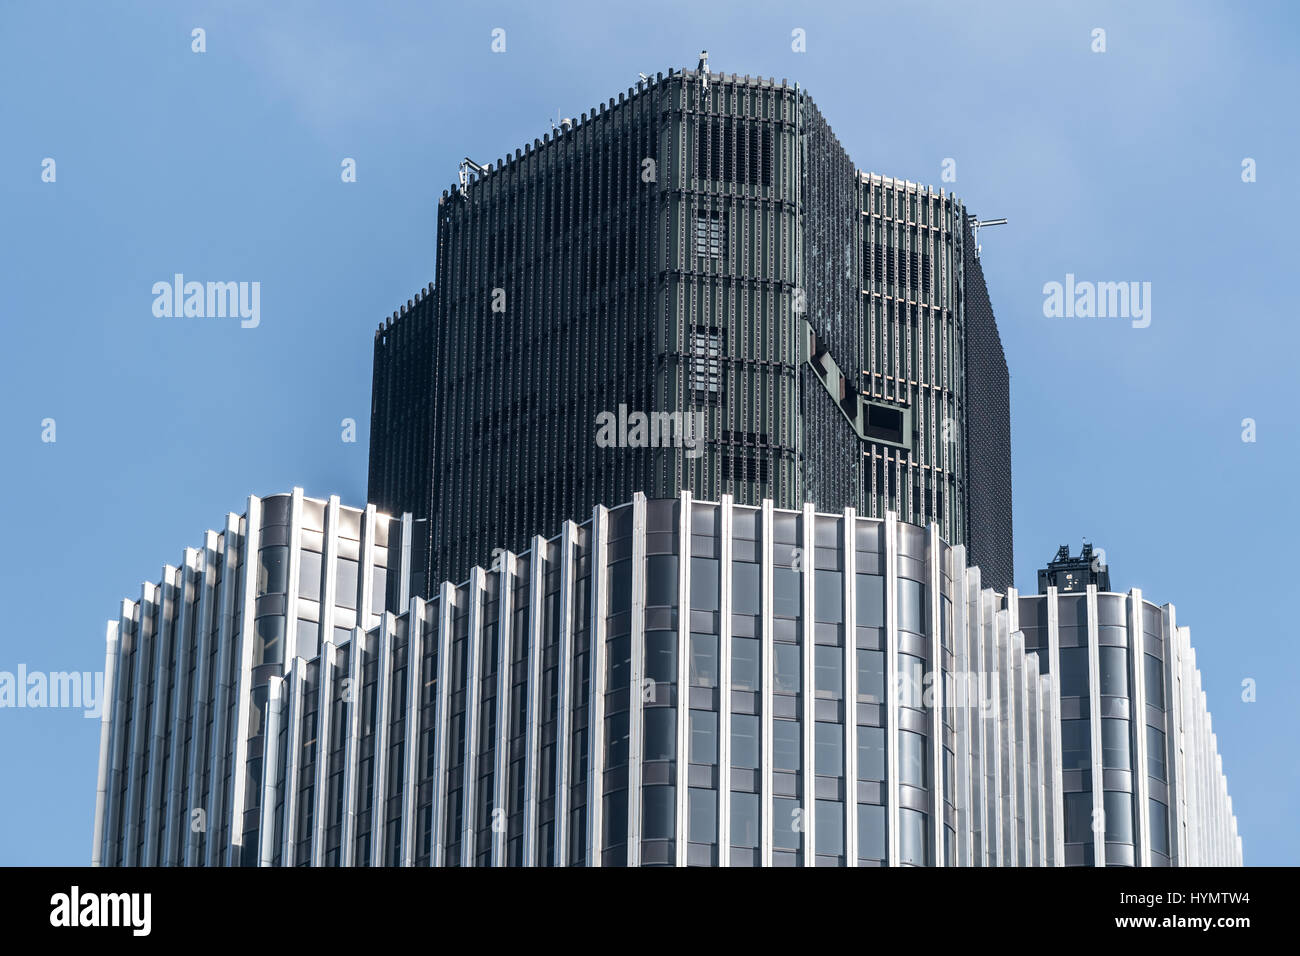 Tower 42 (previously the NatWest Tower) at Old Broad street, City of London, one of the two financial districts in England's capital city. Stock Photo